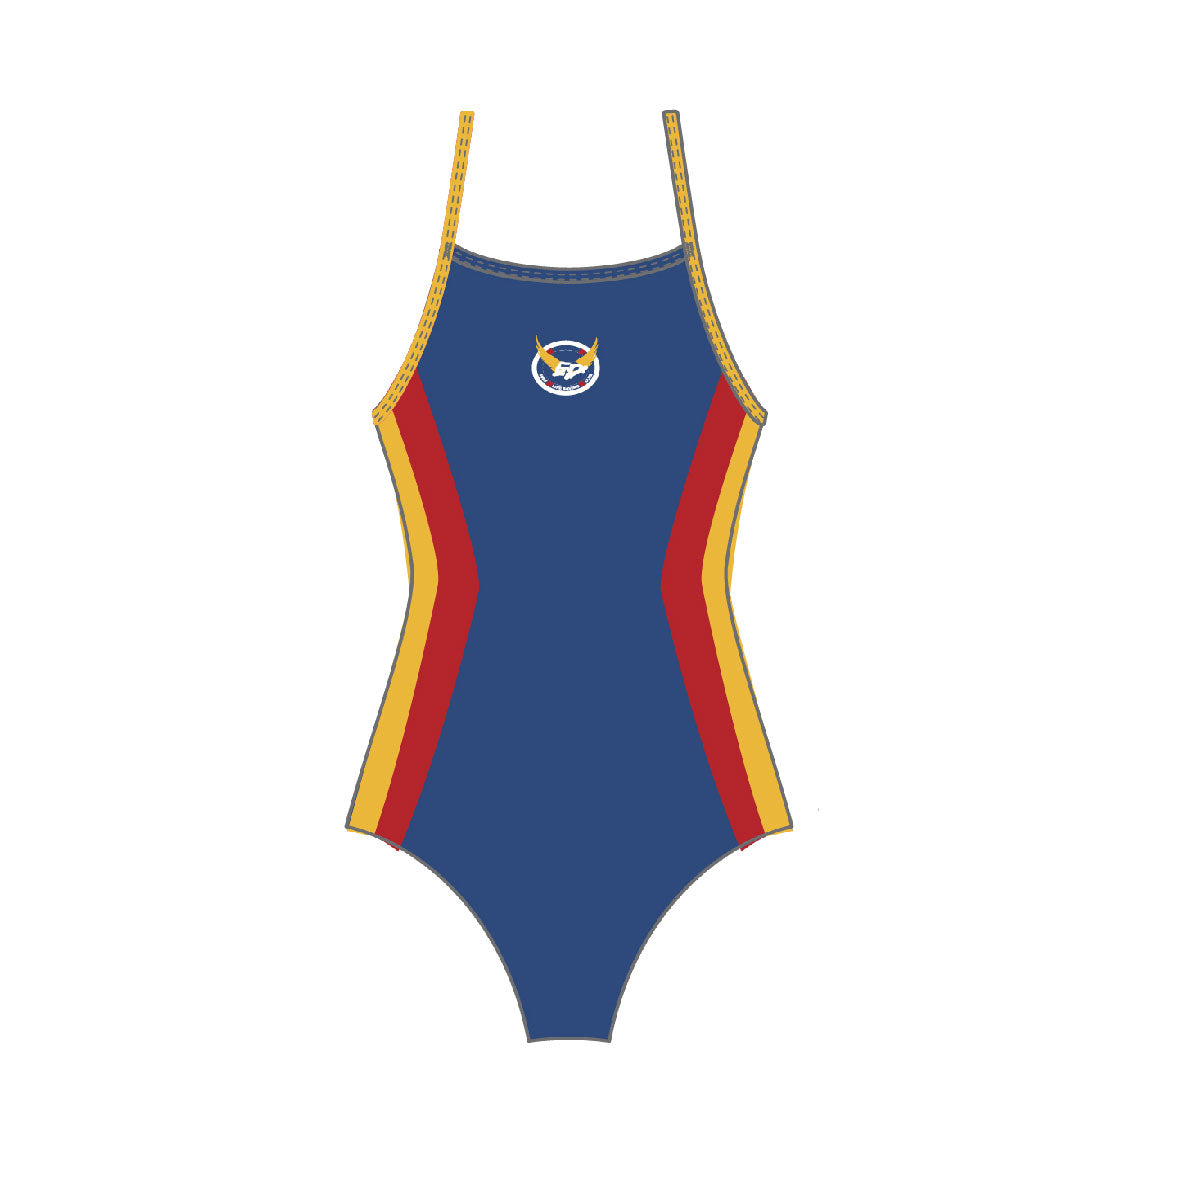 Girls Chlorine Proof One Piece - Shellharbour SLSC